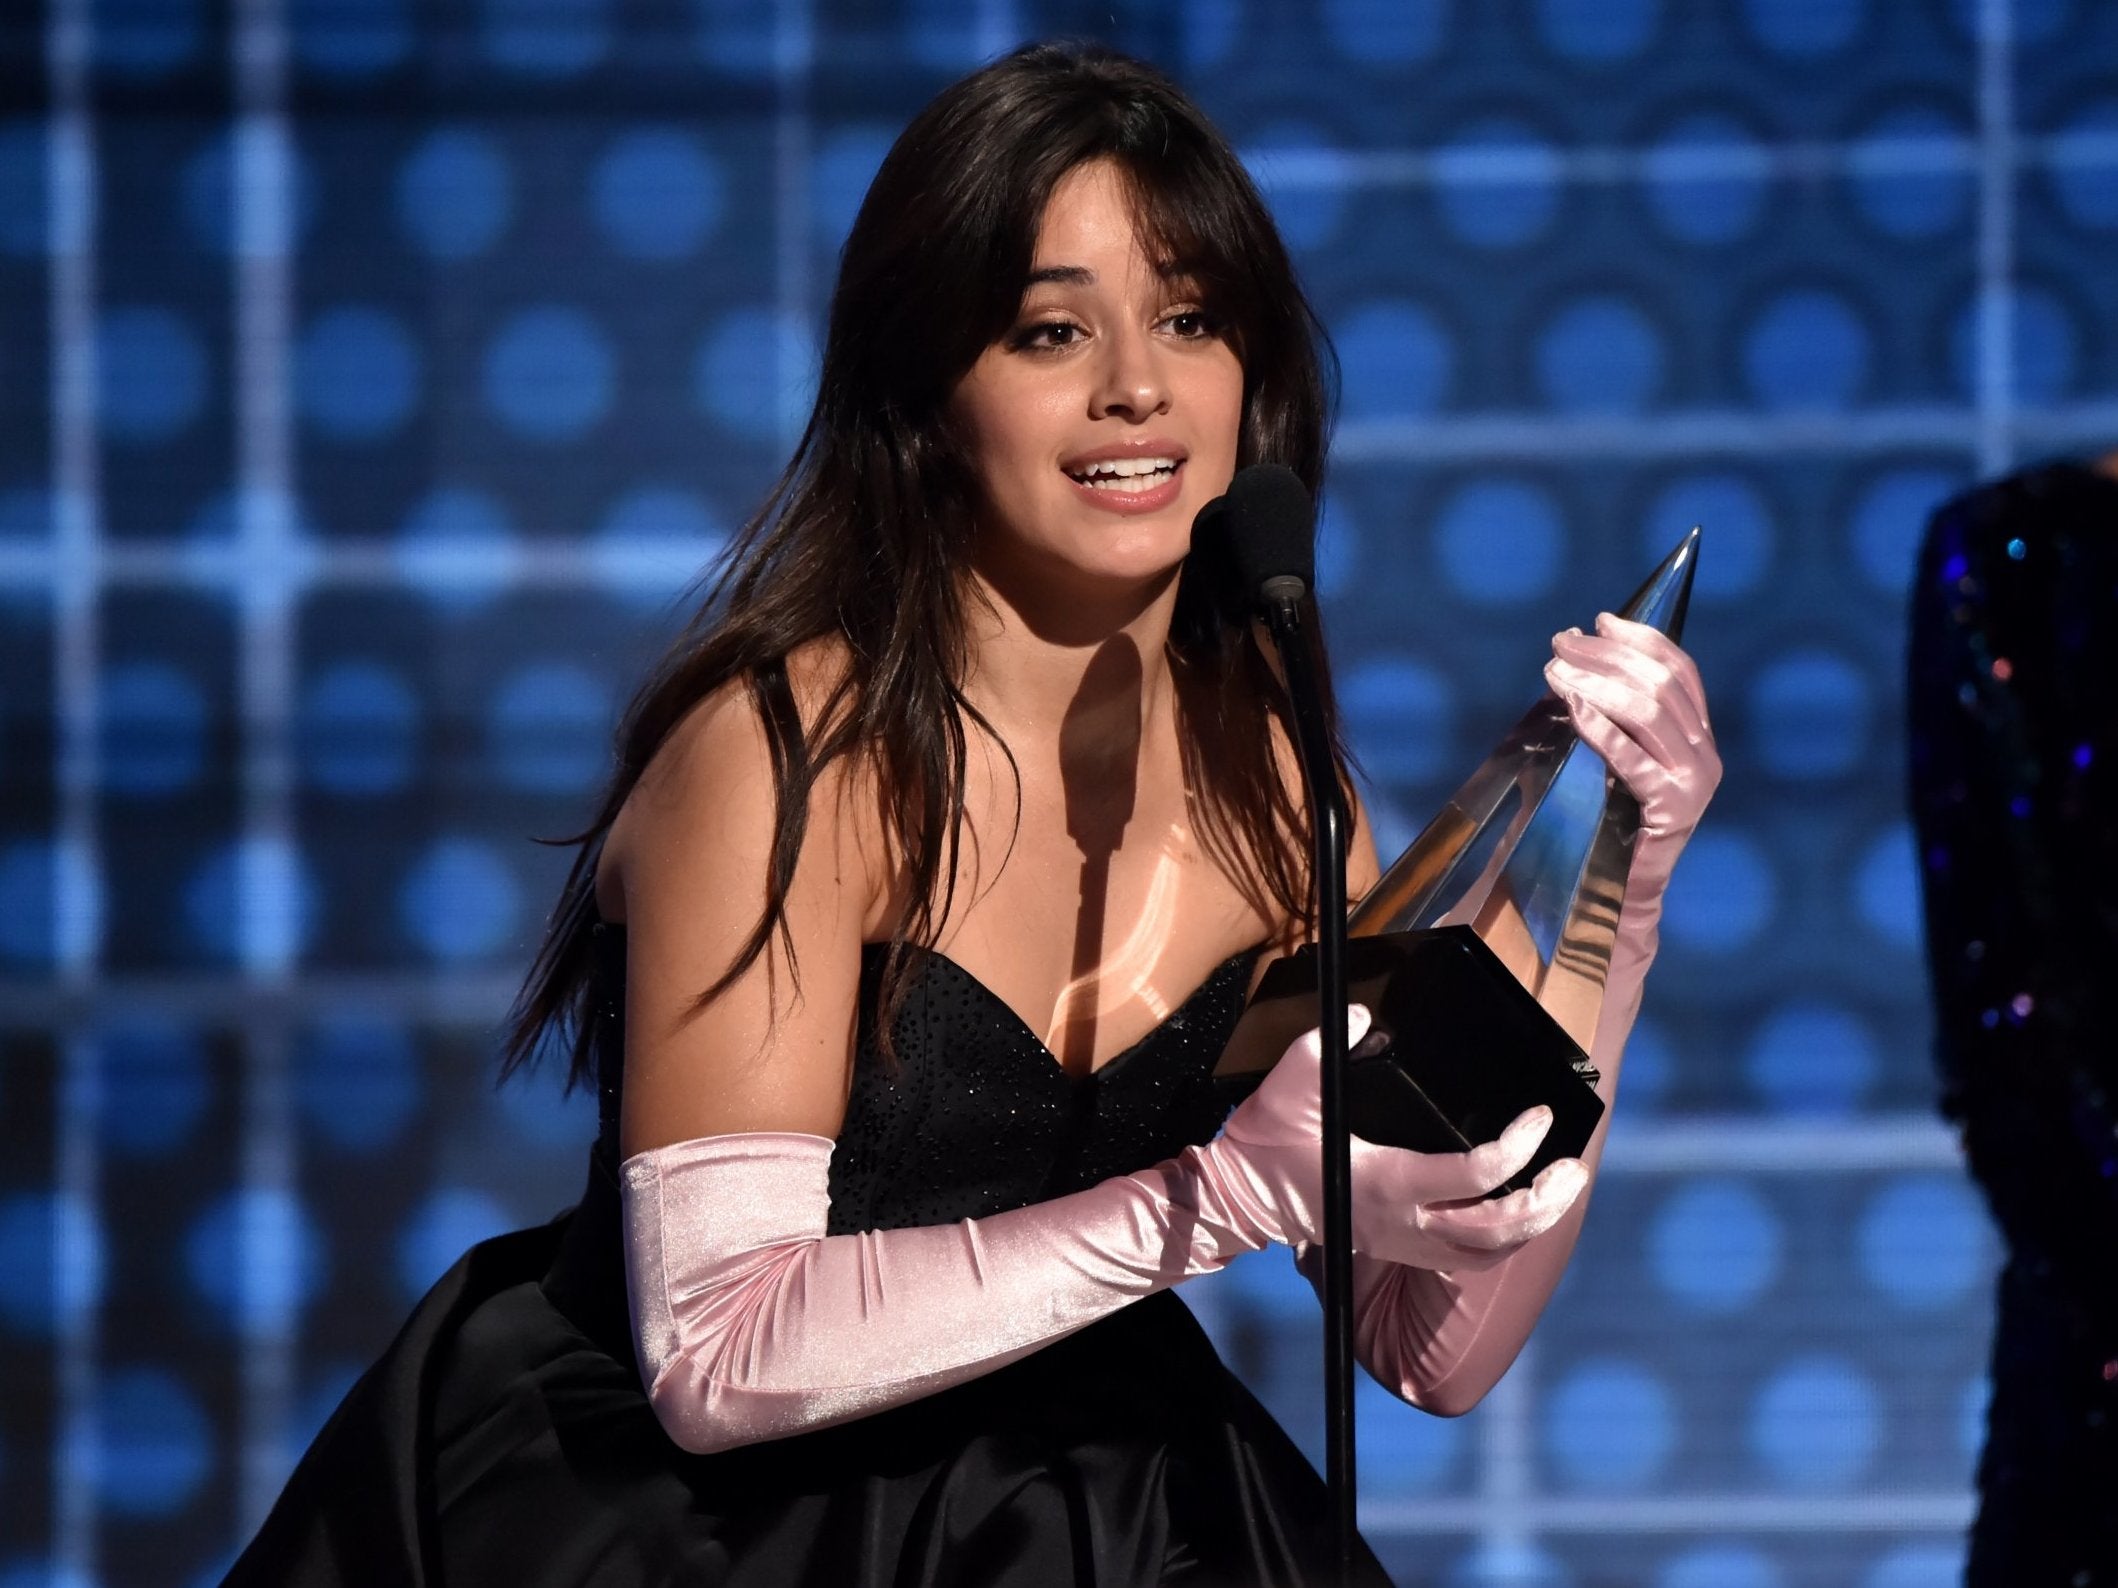 Camila Cabello accepts her AMA award for New Artist of the Year